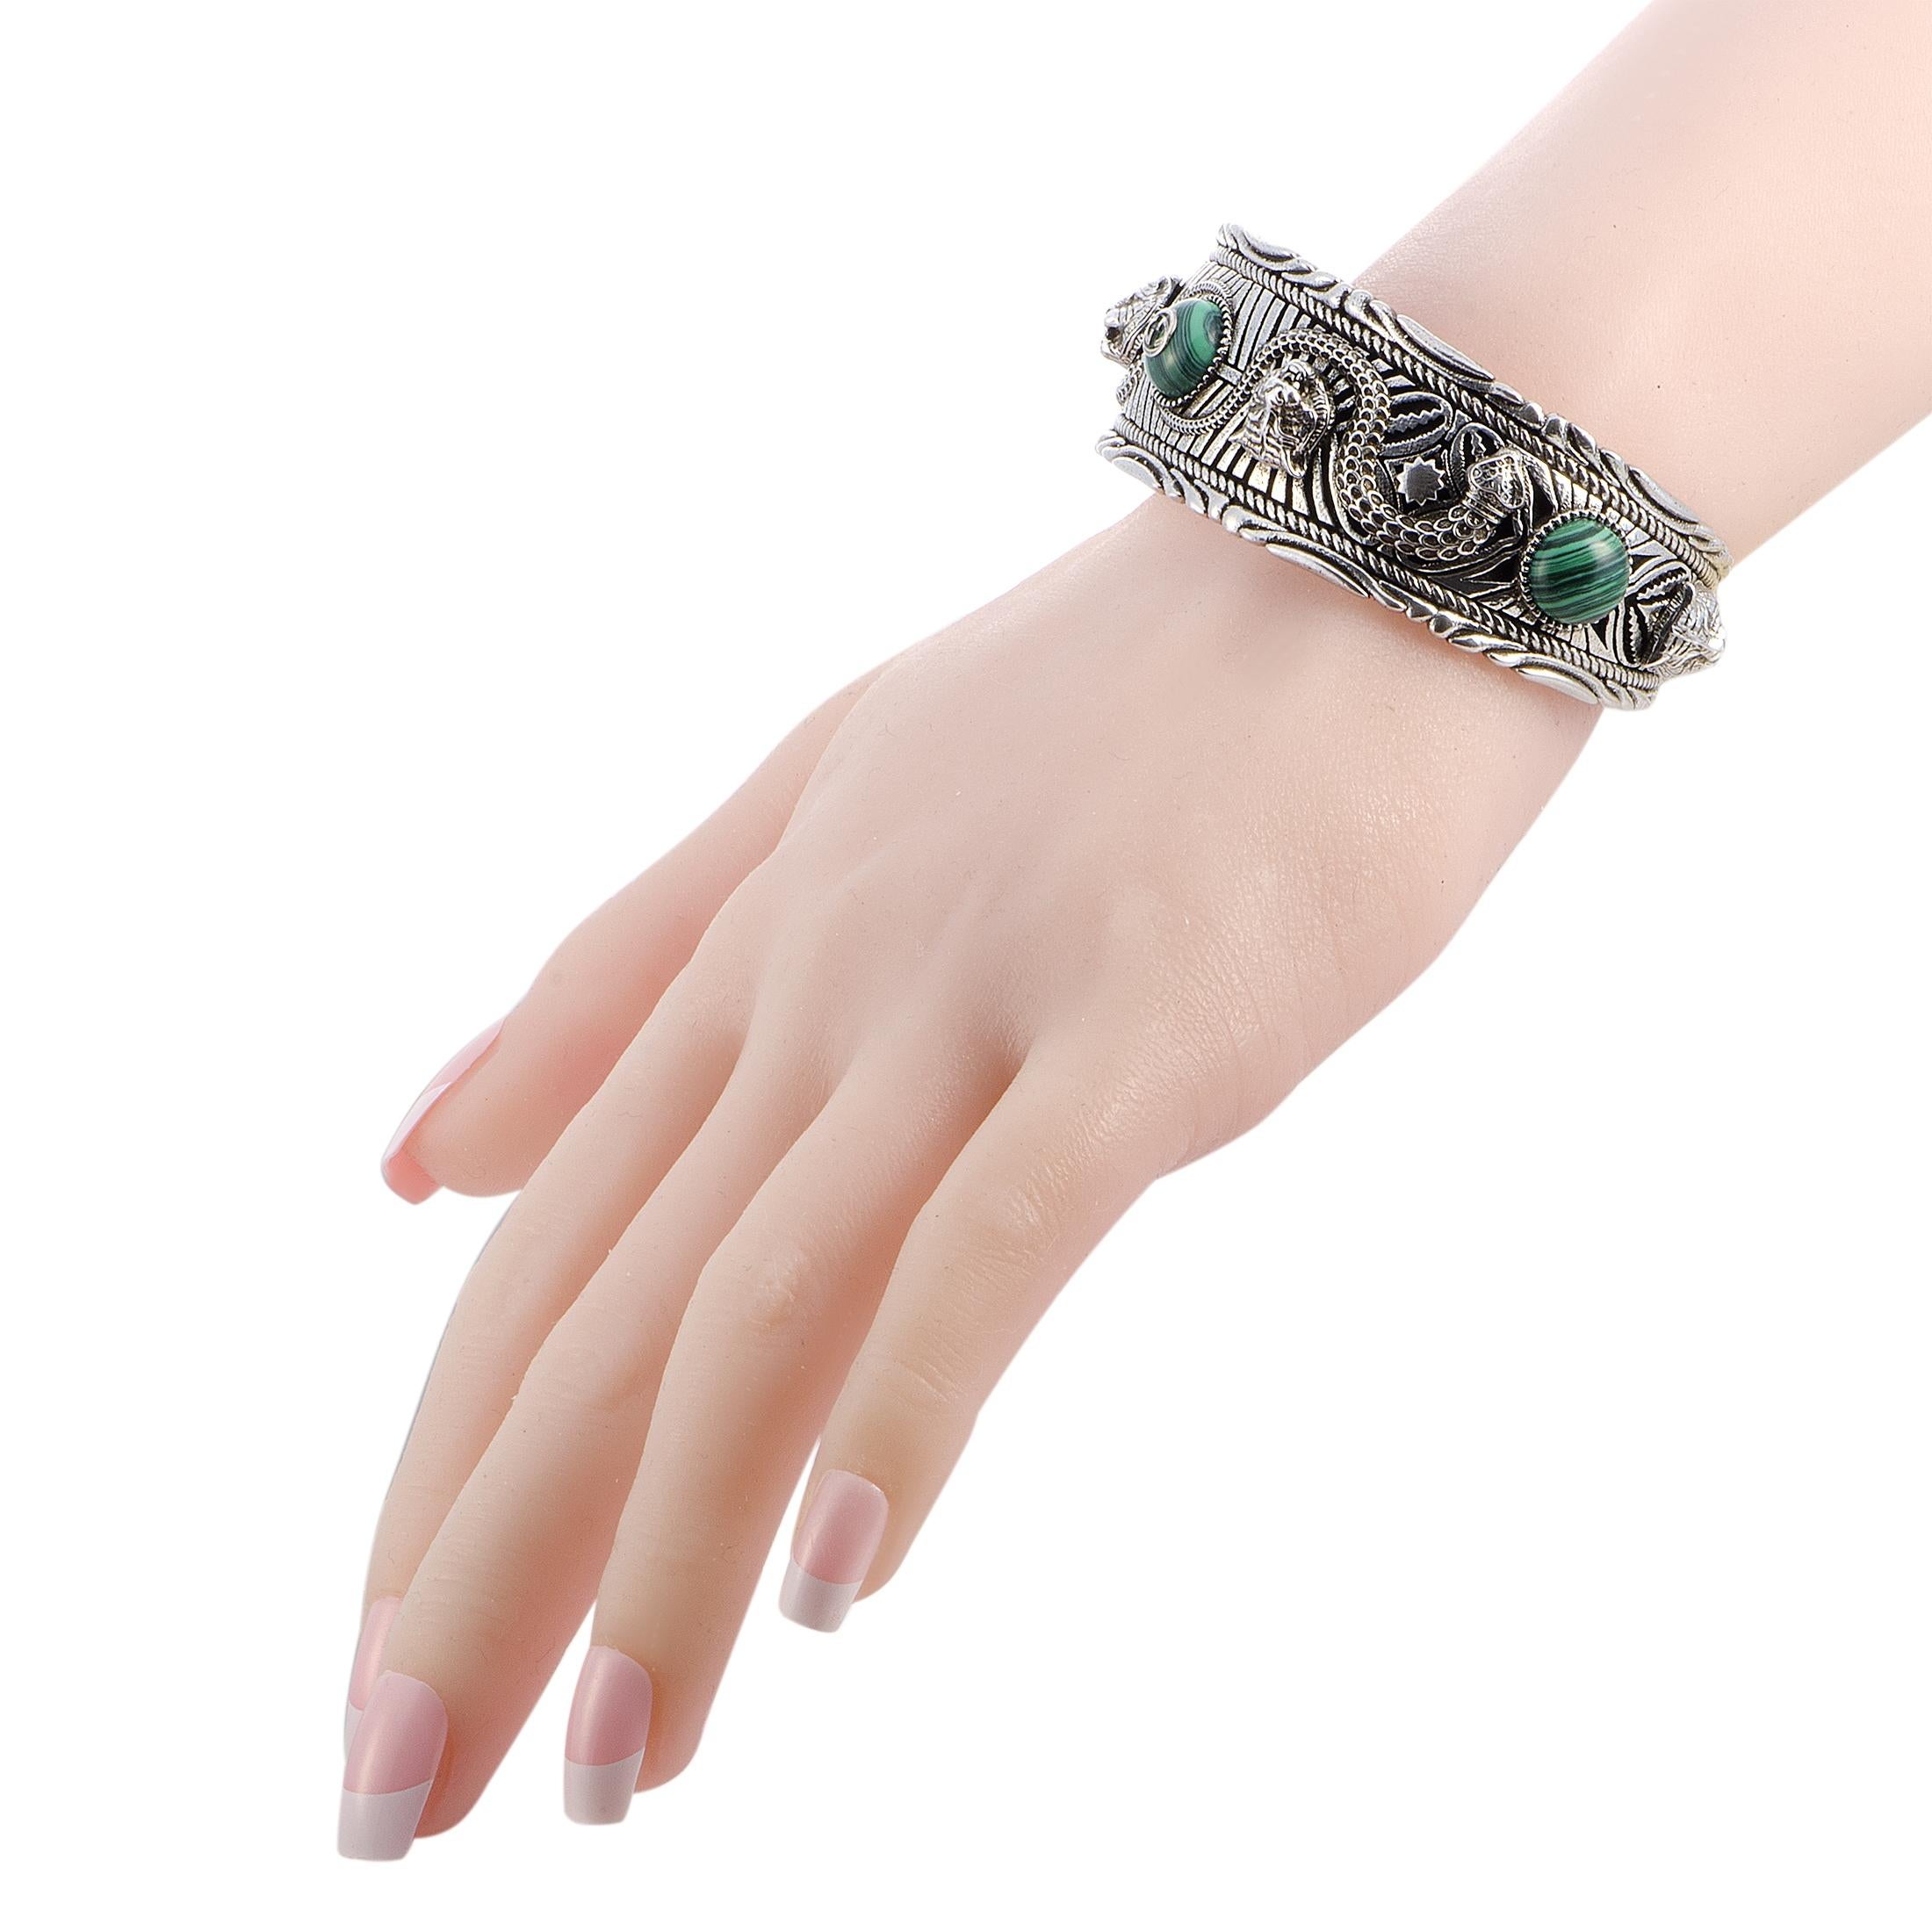 The Gucci “Garden” bracelet is made out of silver and green resin and weighs 86 grams. The bracelet measures 8” in length and 2.55” in diameter.
 
 This item is offered in brand new condition and includes the manufacturer’s box and papers.
